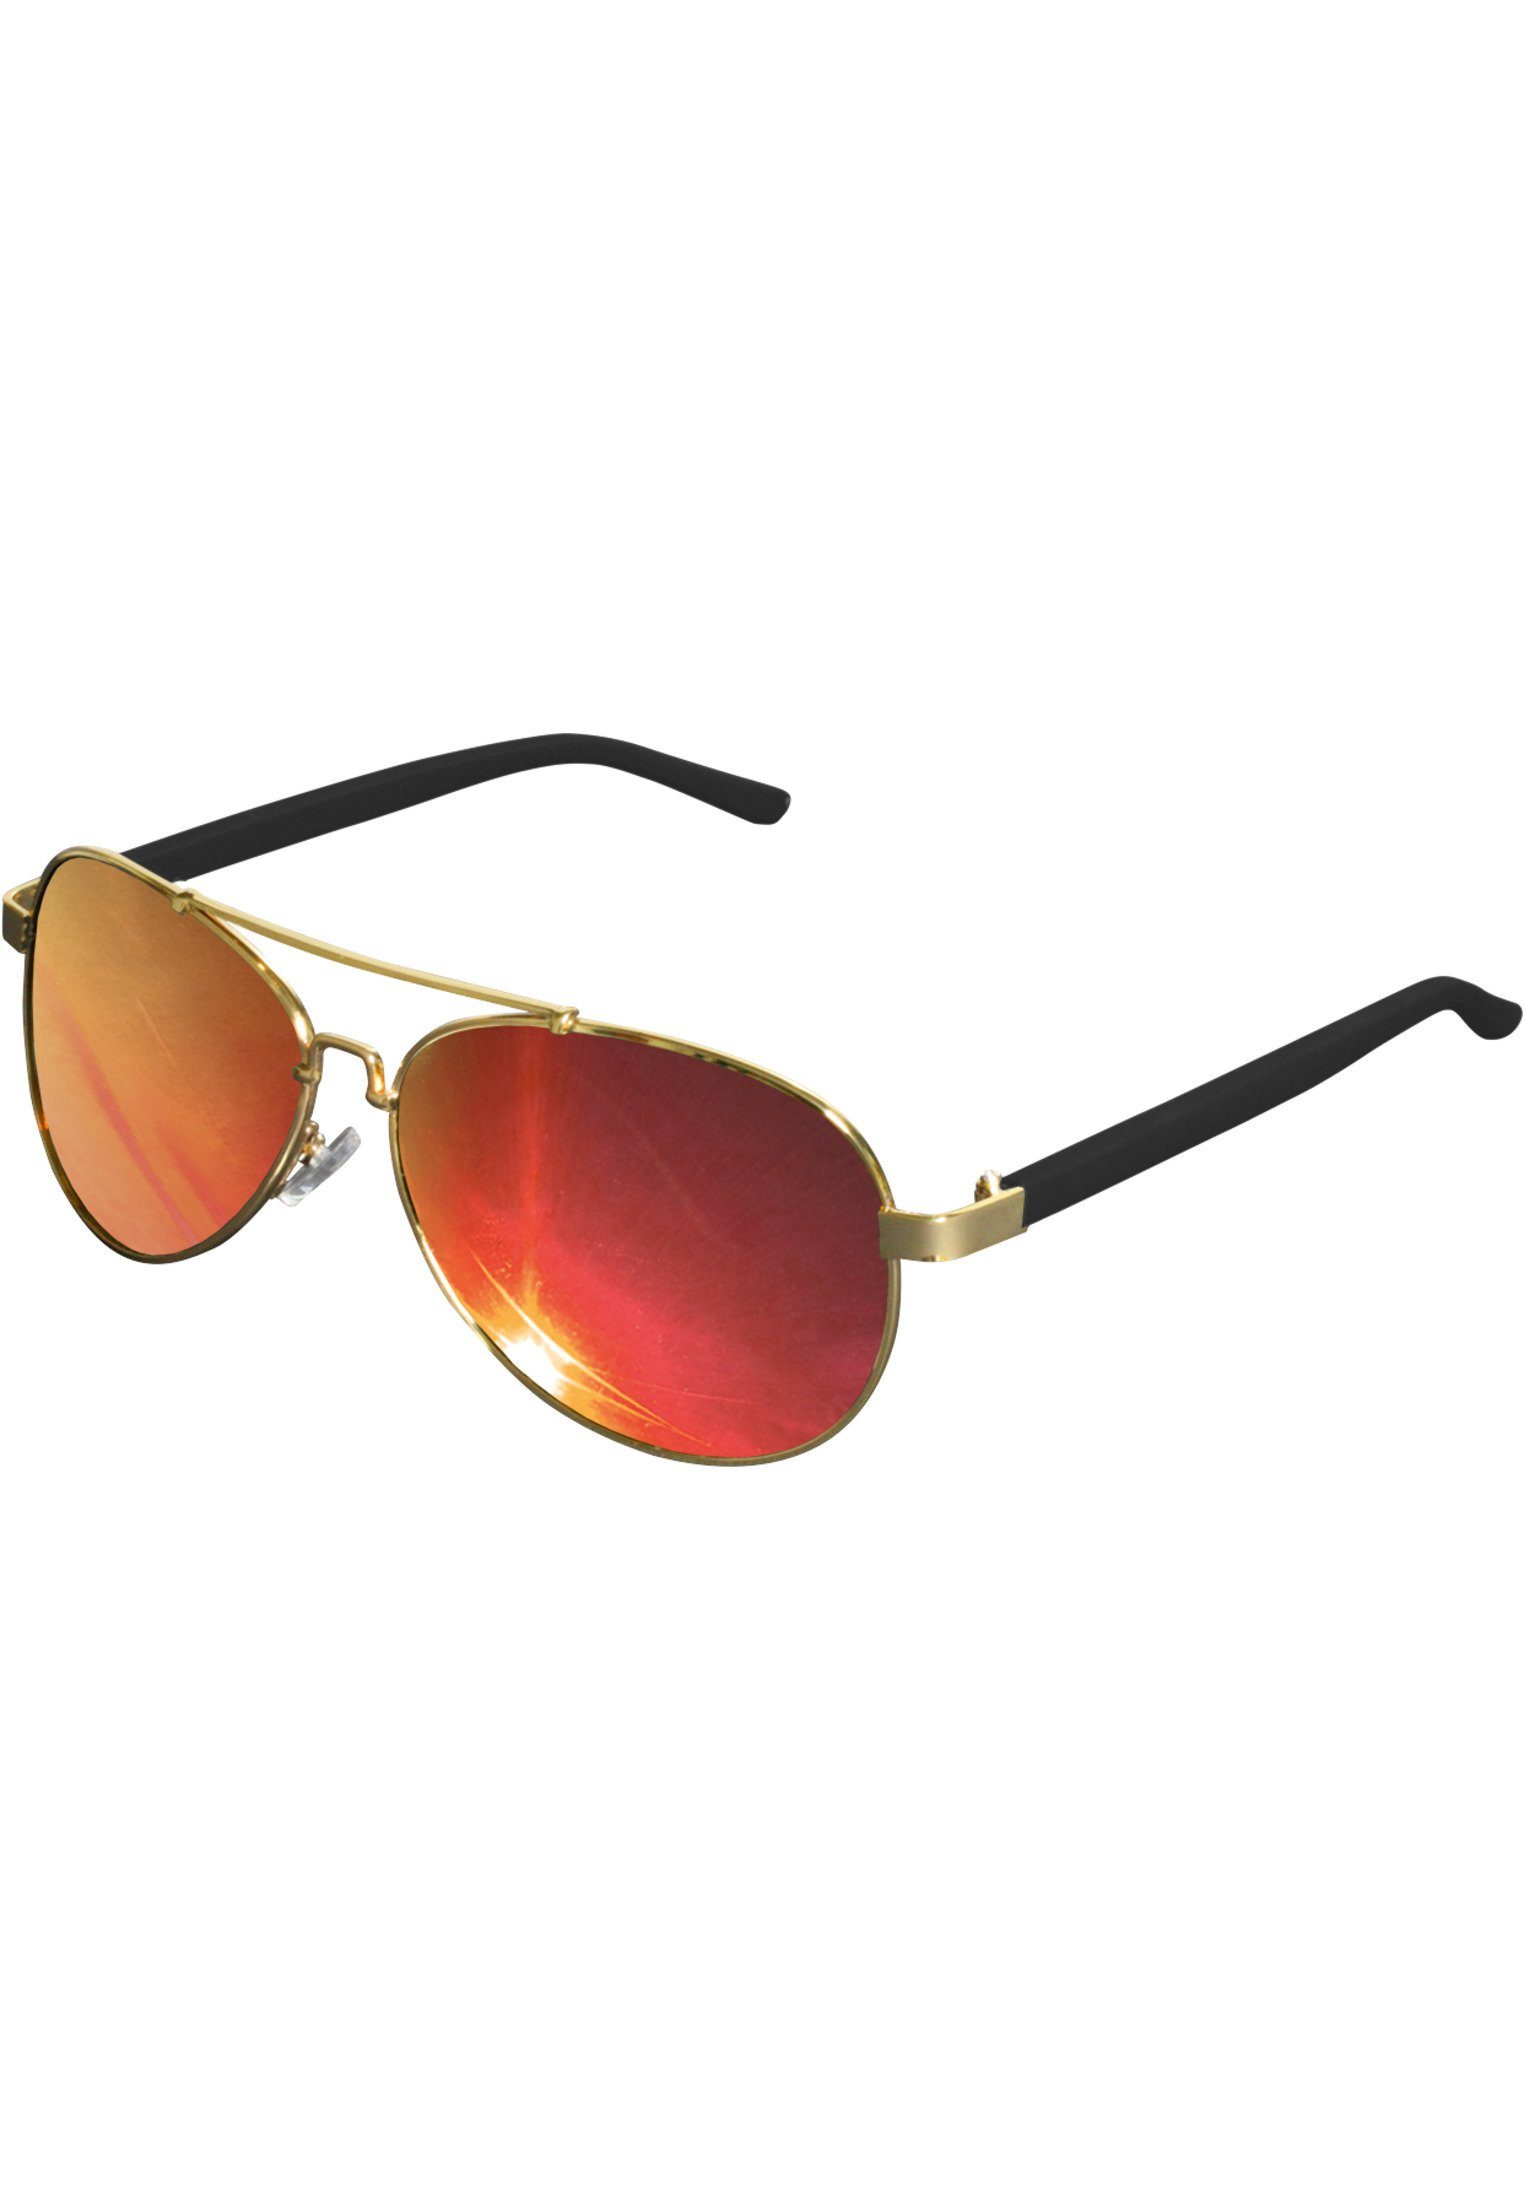 MSTRDS Sonnenbrille Accessoires Mirror Sunglasses Mumbo gold/red